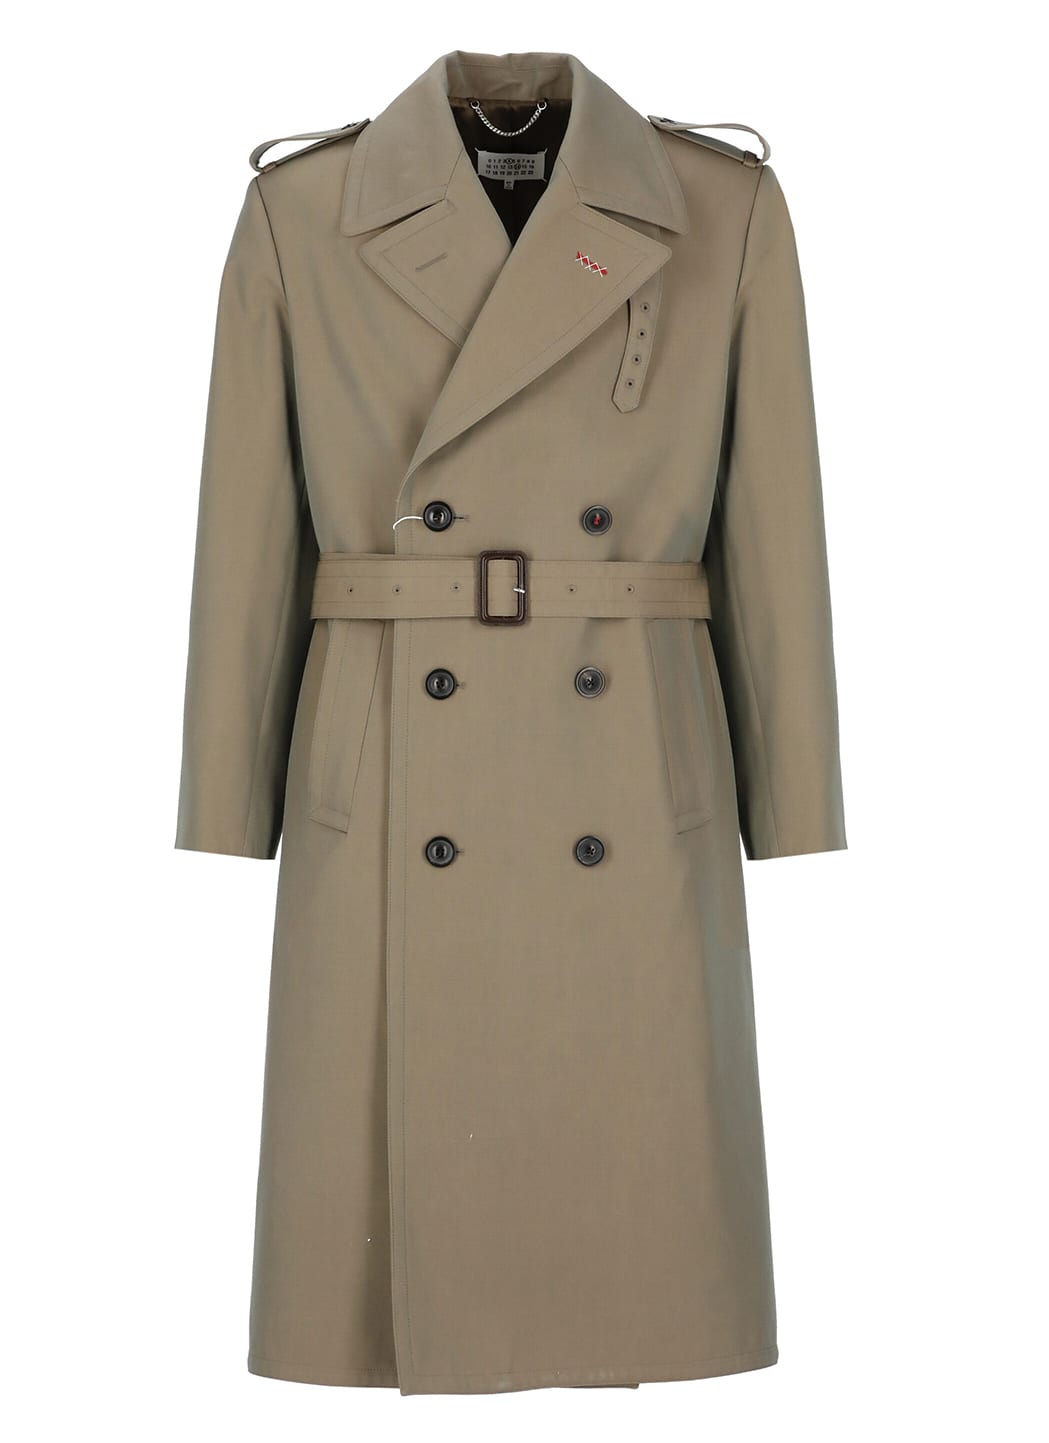 MAISON MARGIELA WOOL DOUBLE-BREASTED TRENCH